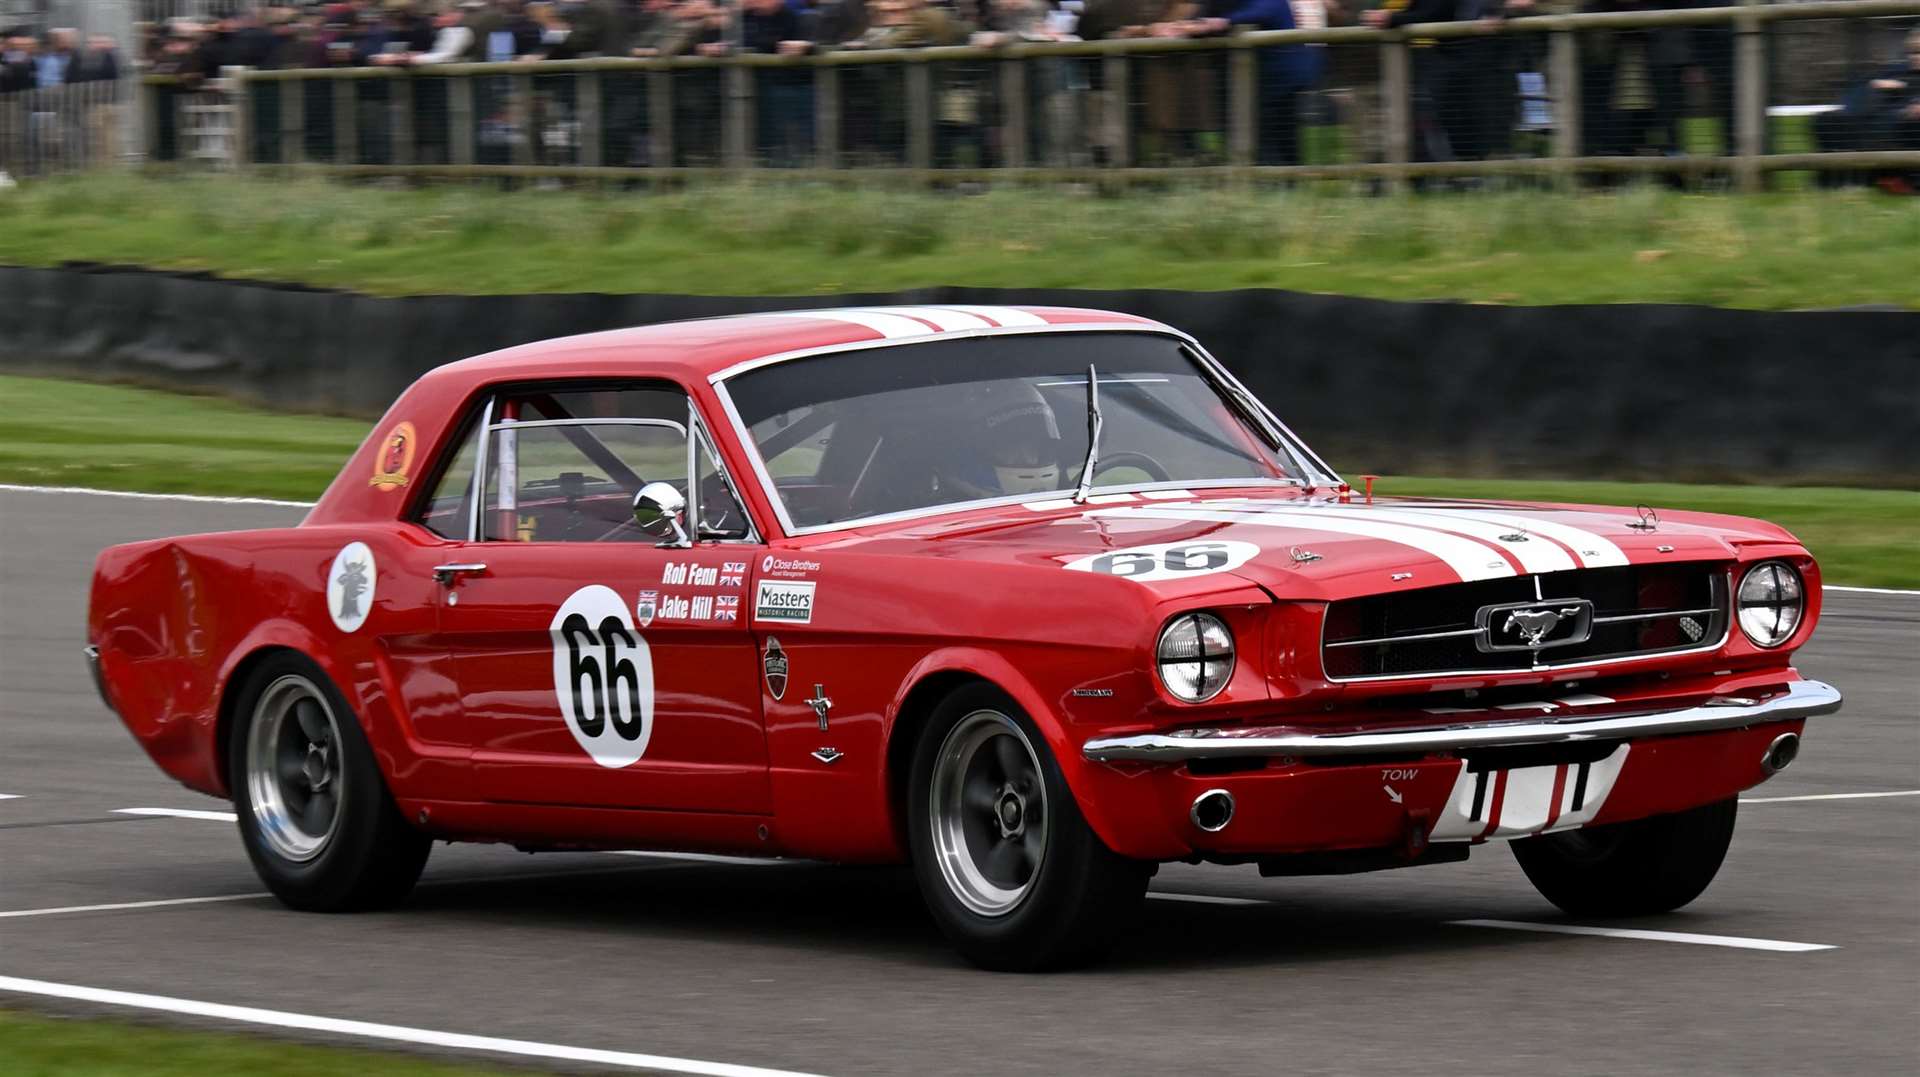 Jake Hill at the wheel of the Mustang he shared with Rob Fenn. Picture: Simon Hildrew